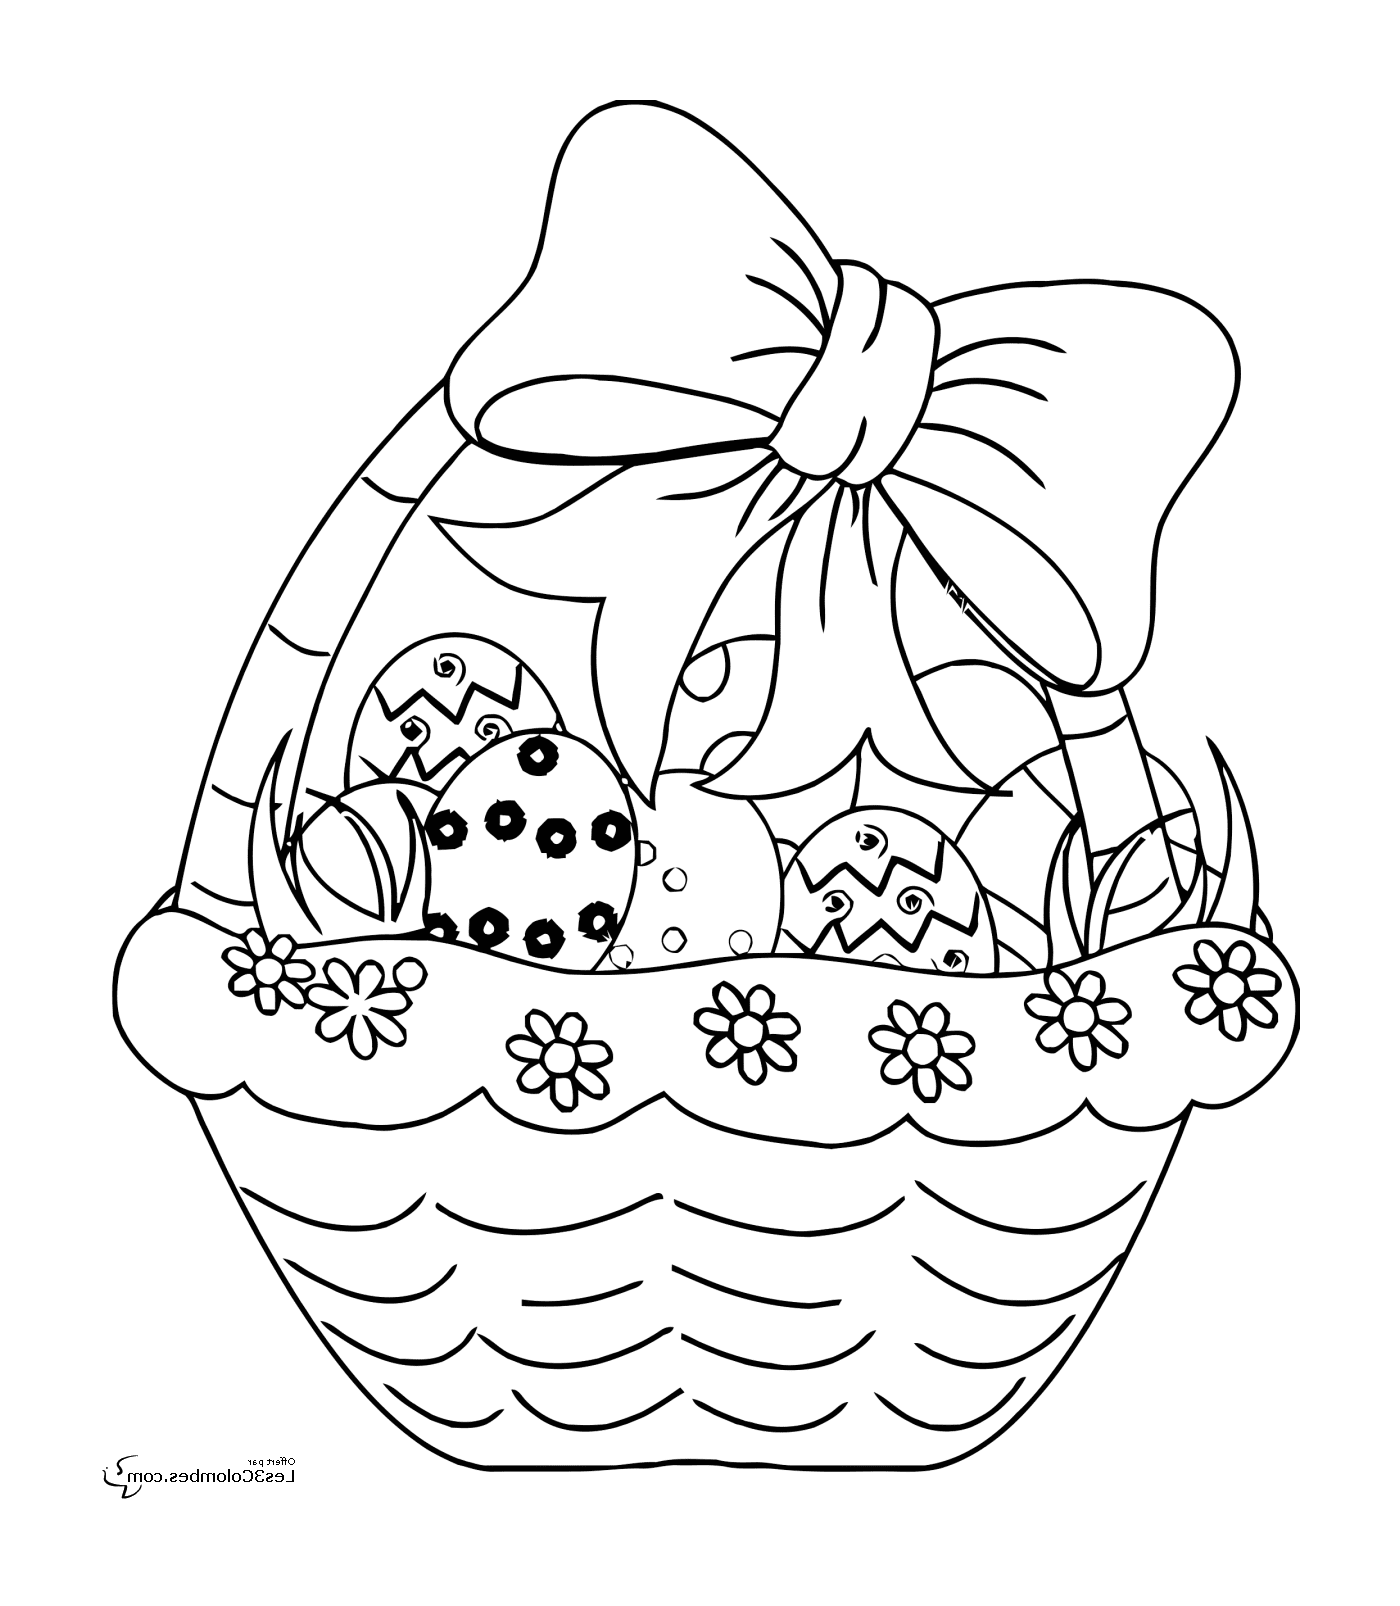  A basket filled with Easter eggs with a knot 